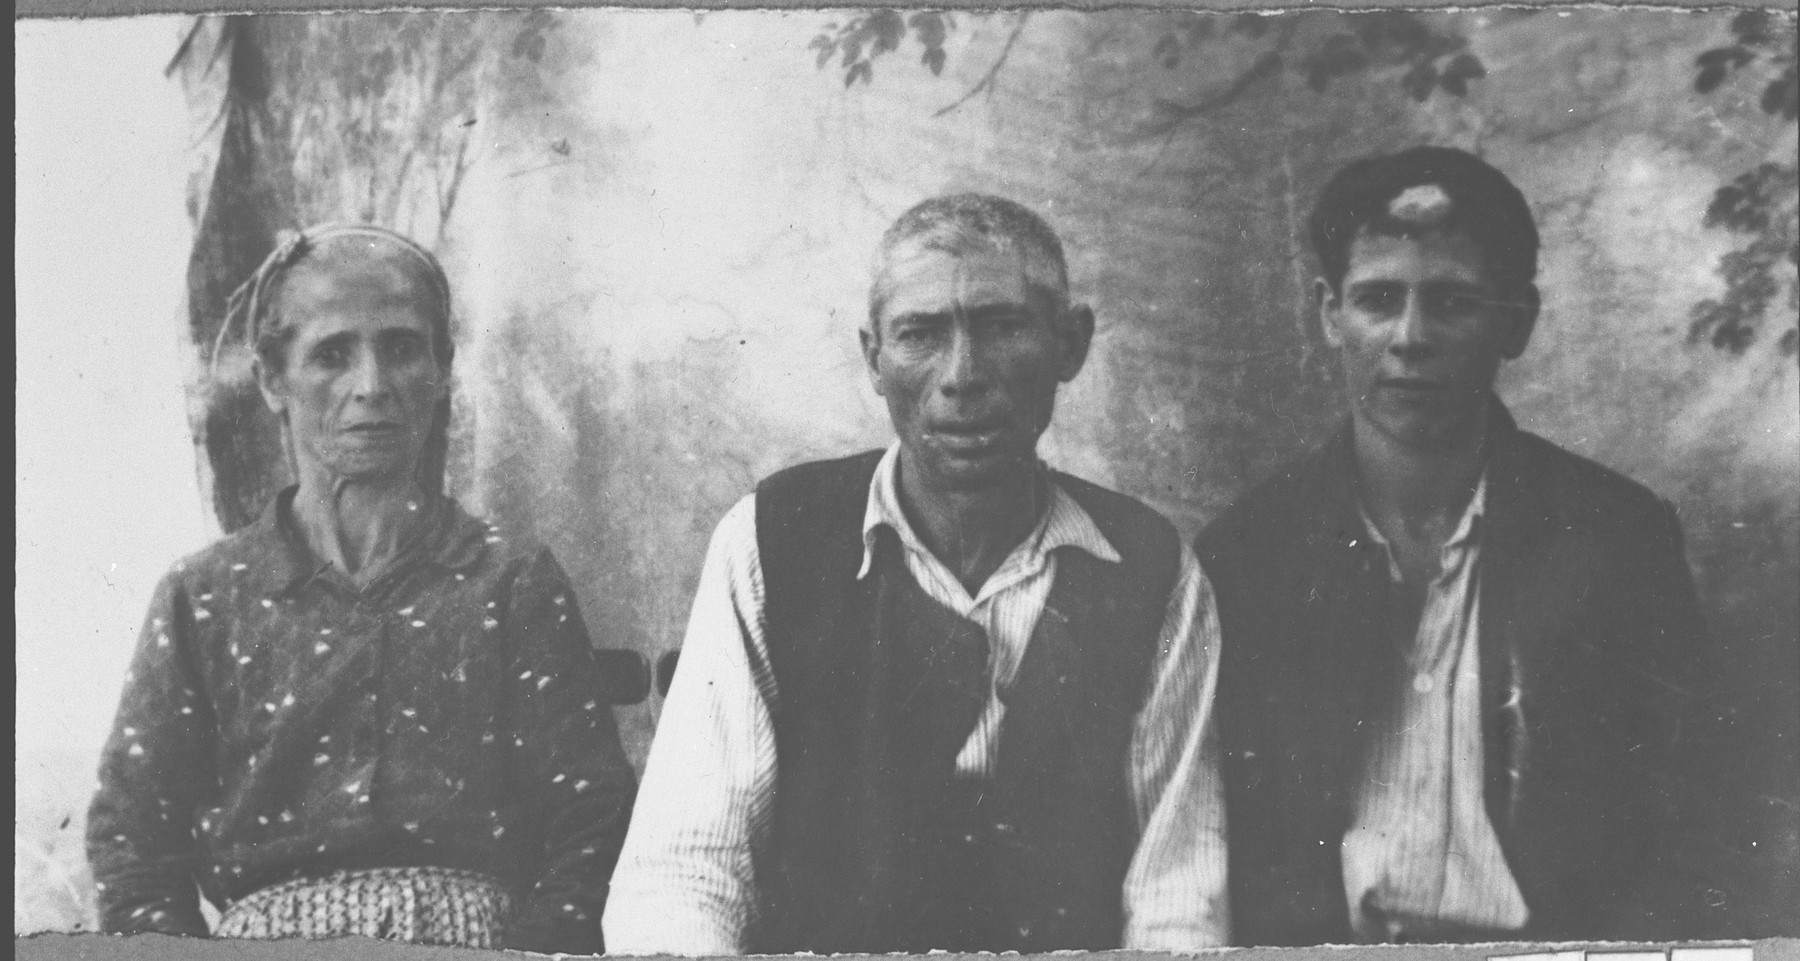 Portrait of Solomon Benjakar, his wife, Lia, and his son, Yosef.  Solomon was a handworker and Yosef, a student.  They lived at Punika 129 in Bitola.